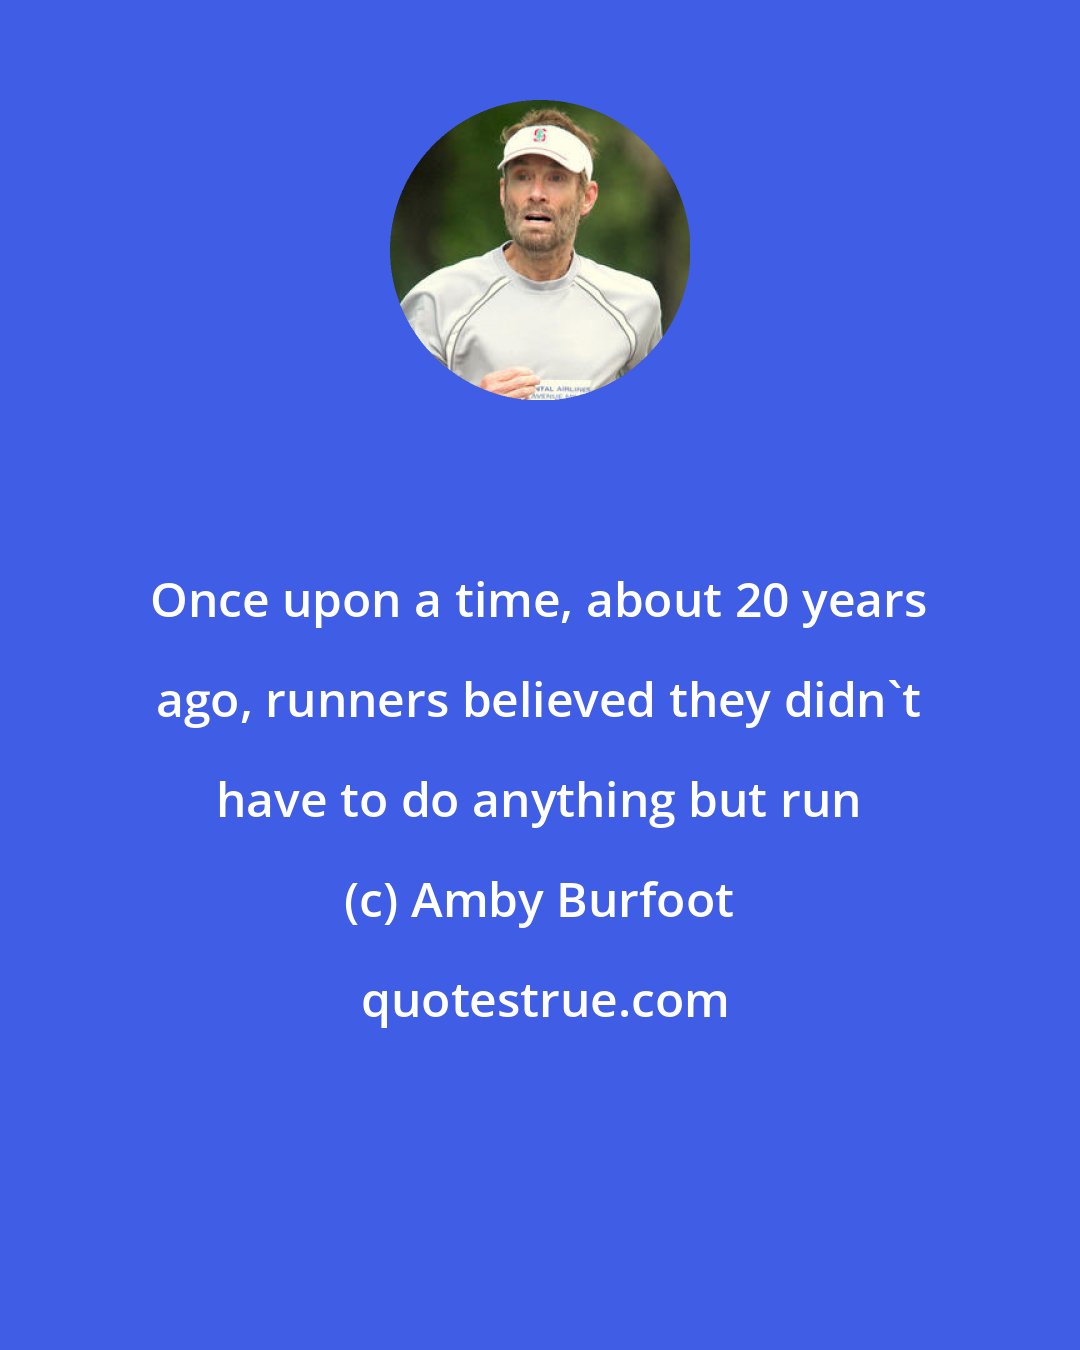 Amby Burfoot: Once upon a time, about 20 years ago, runners believed they didn't have to do anything but run